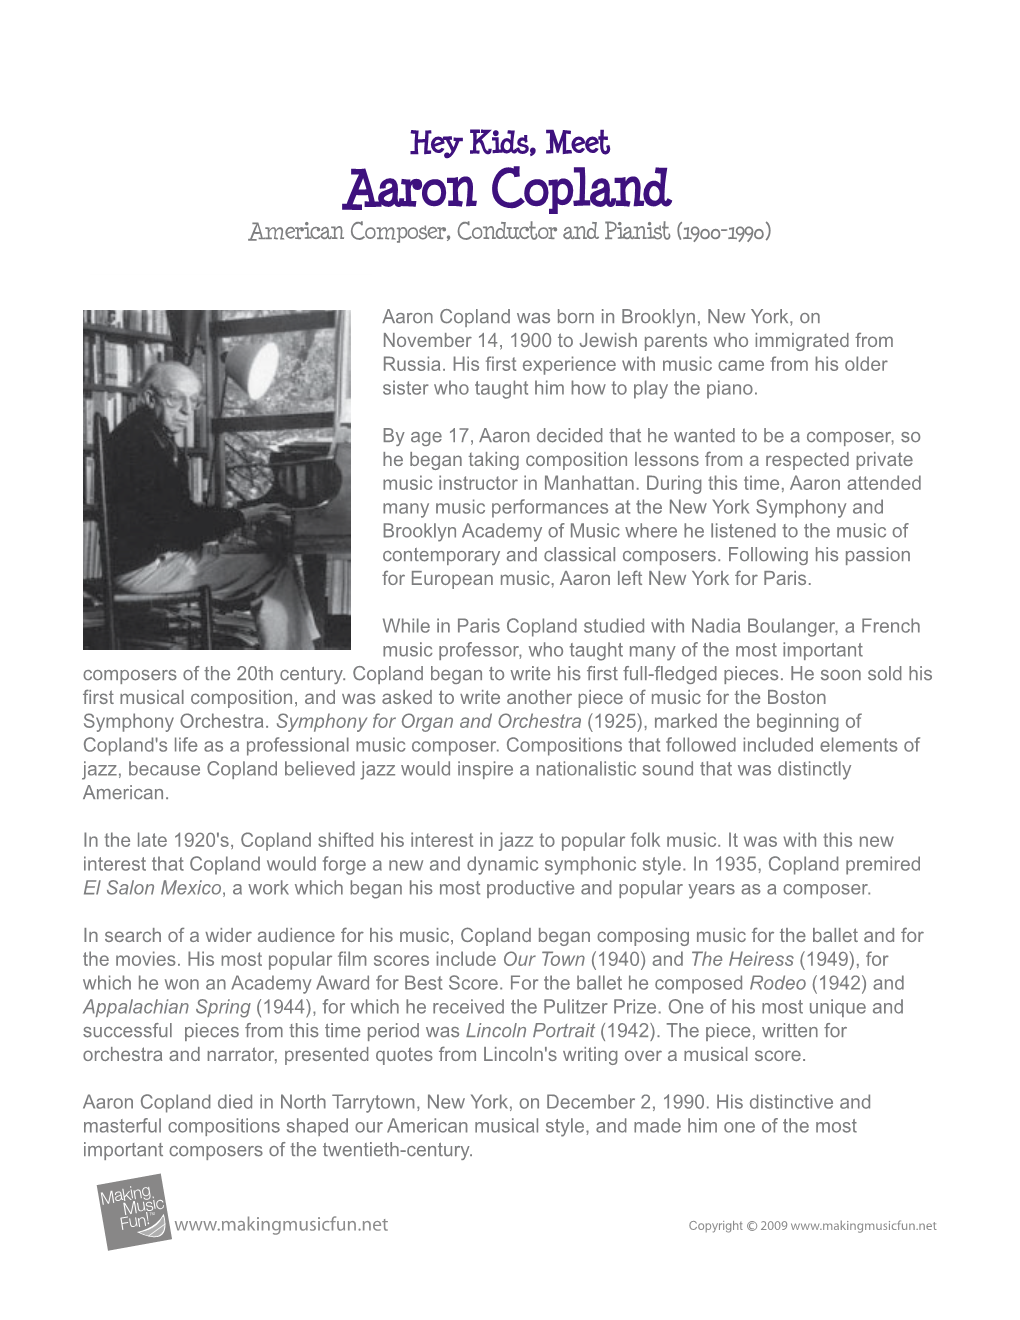 Aaron Copland American Composer, Conductor and Pianist (1900-1990)